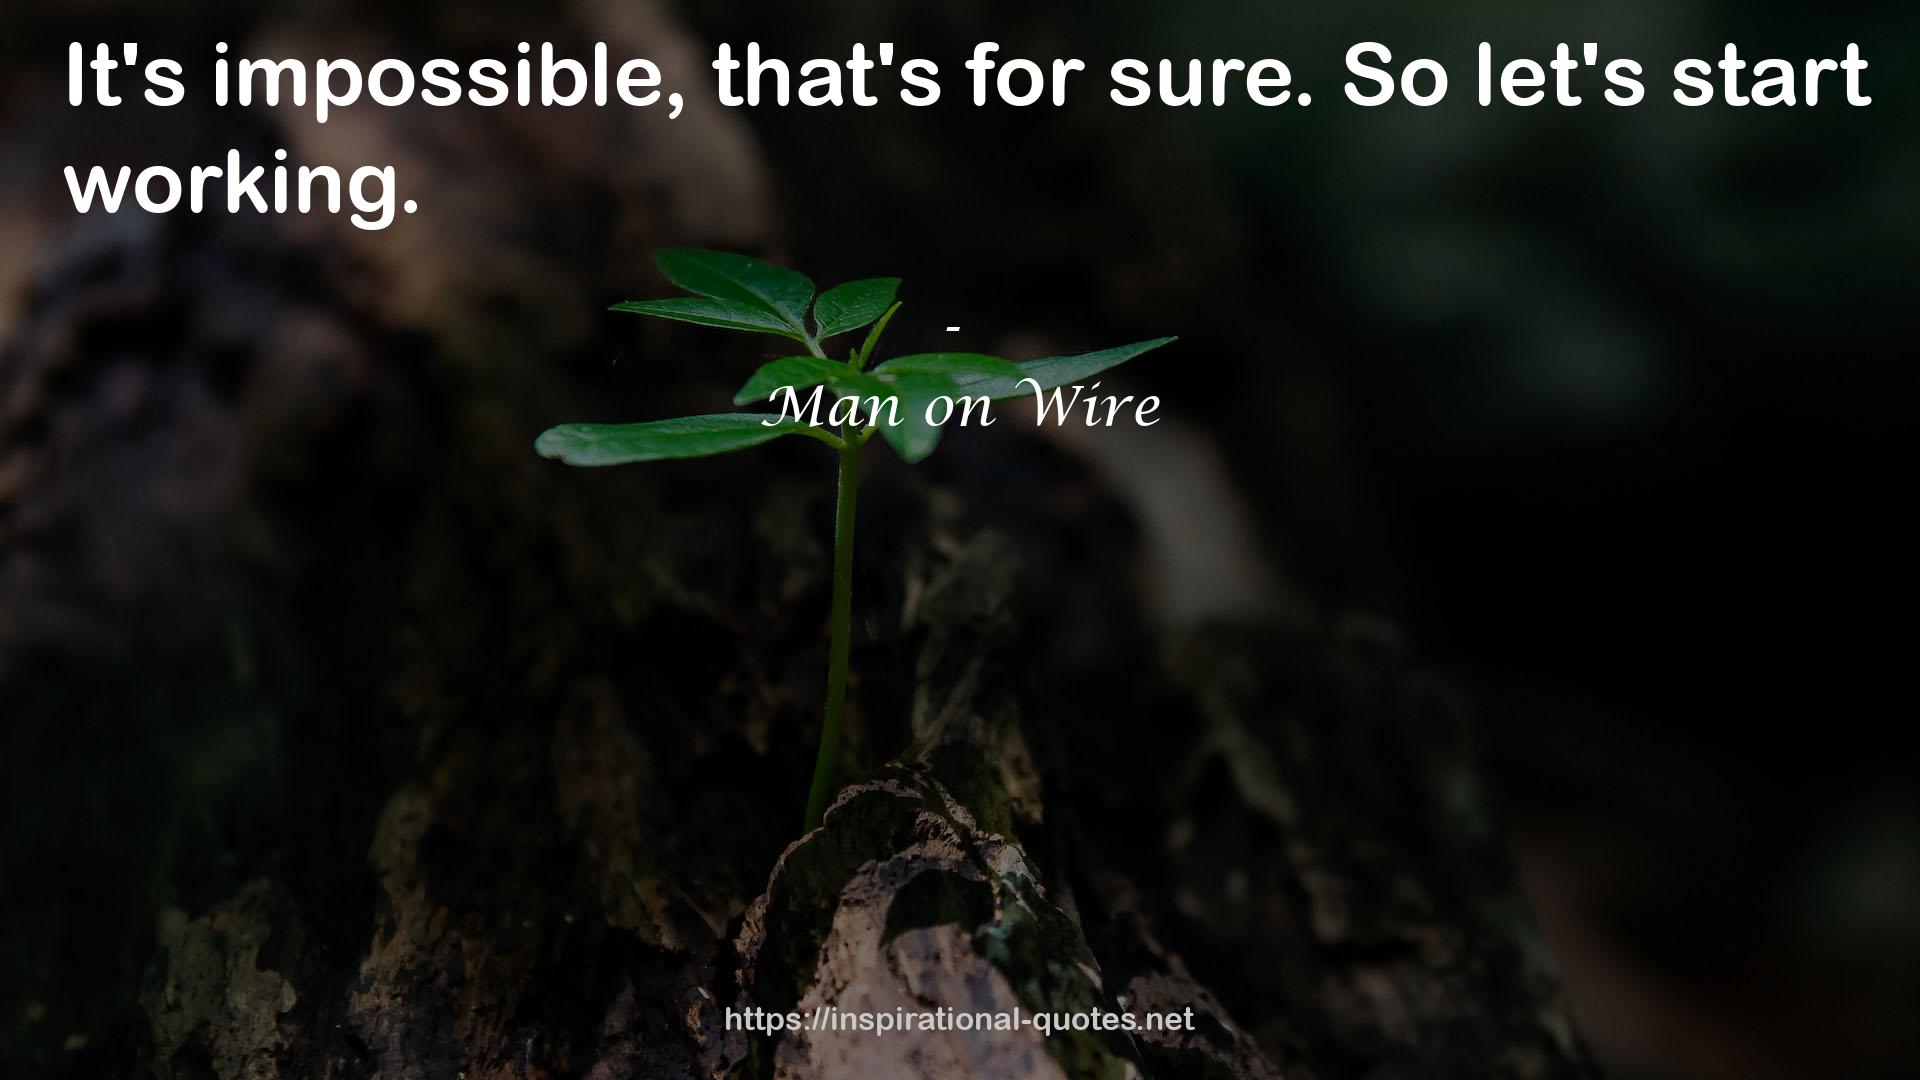 Man on Wire QUOTES